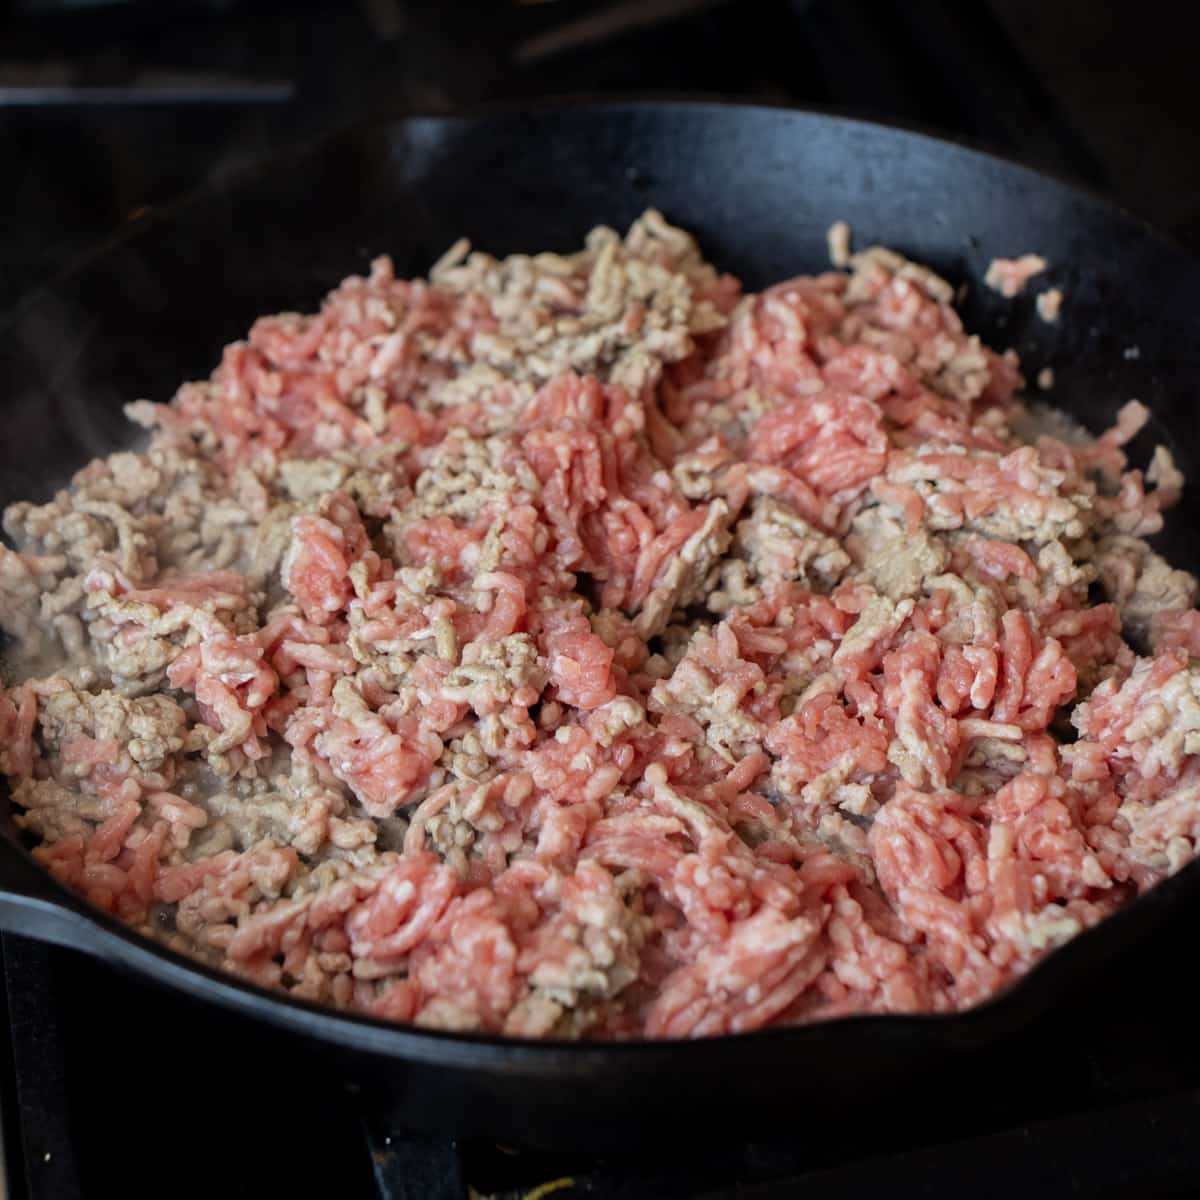 Ground pork in a cast iron skillet being cooked.